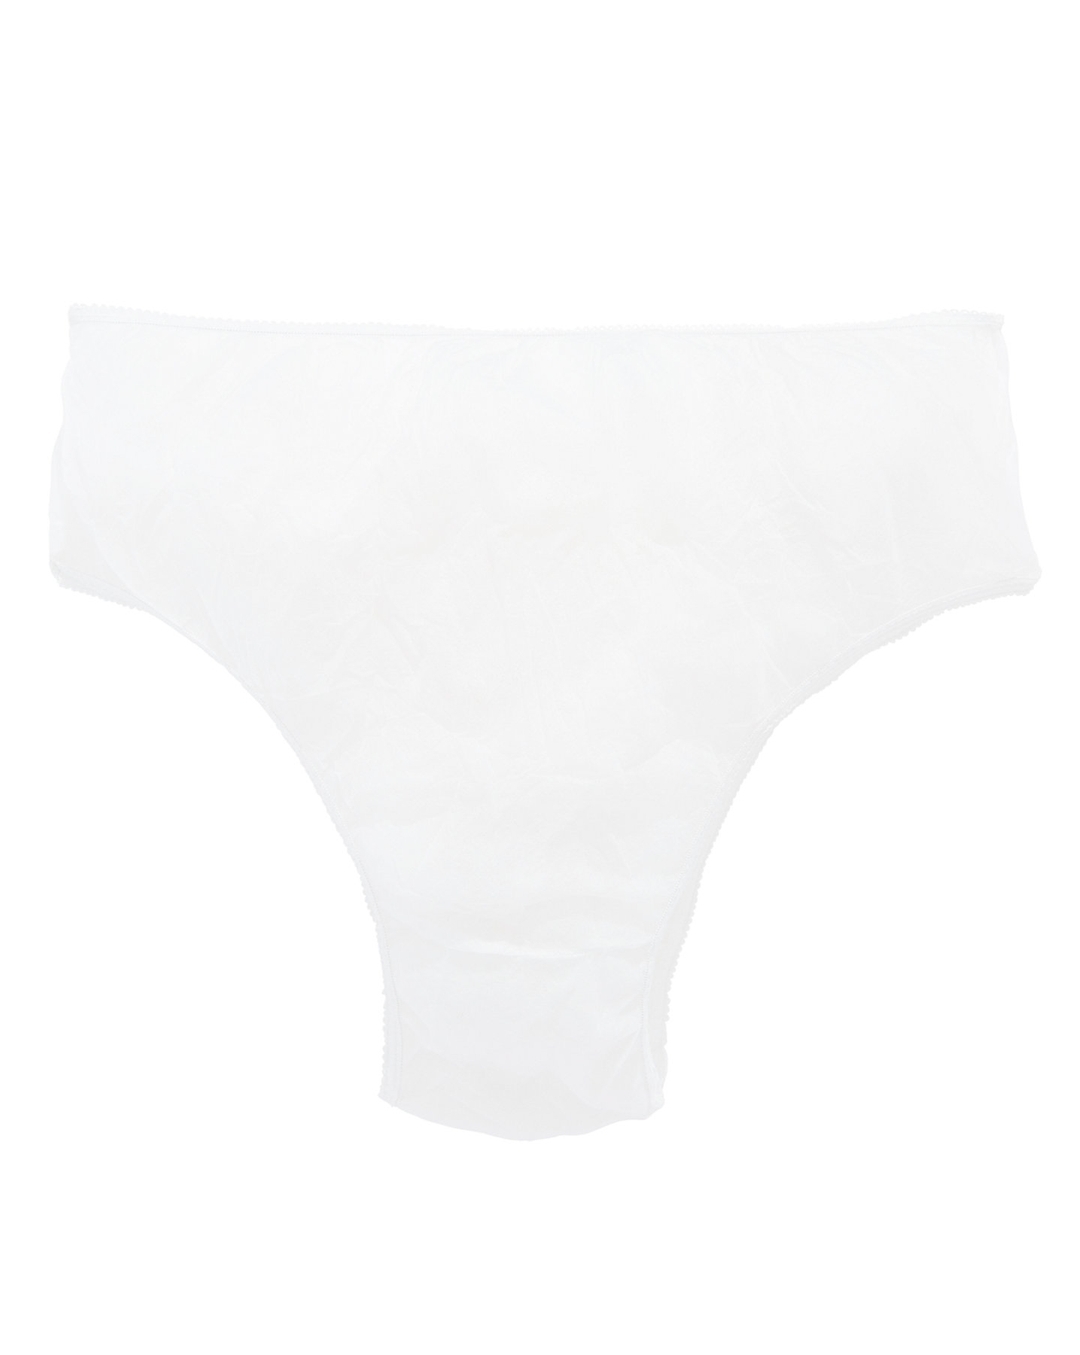 Buy Mothercare Disposable Maternity Briefs Small Online at Best Price